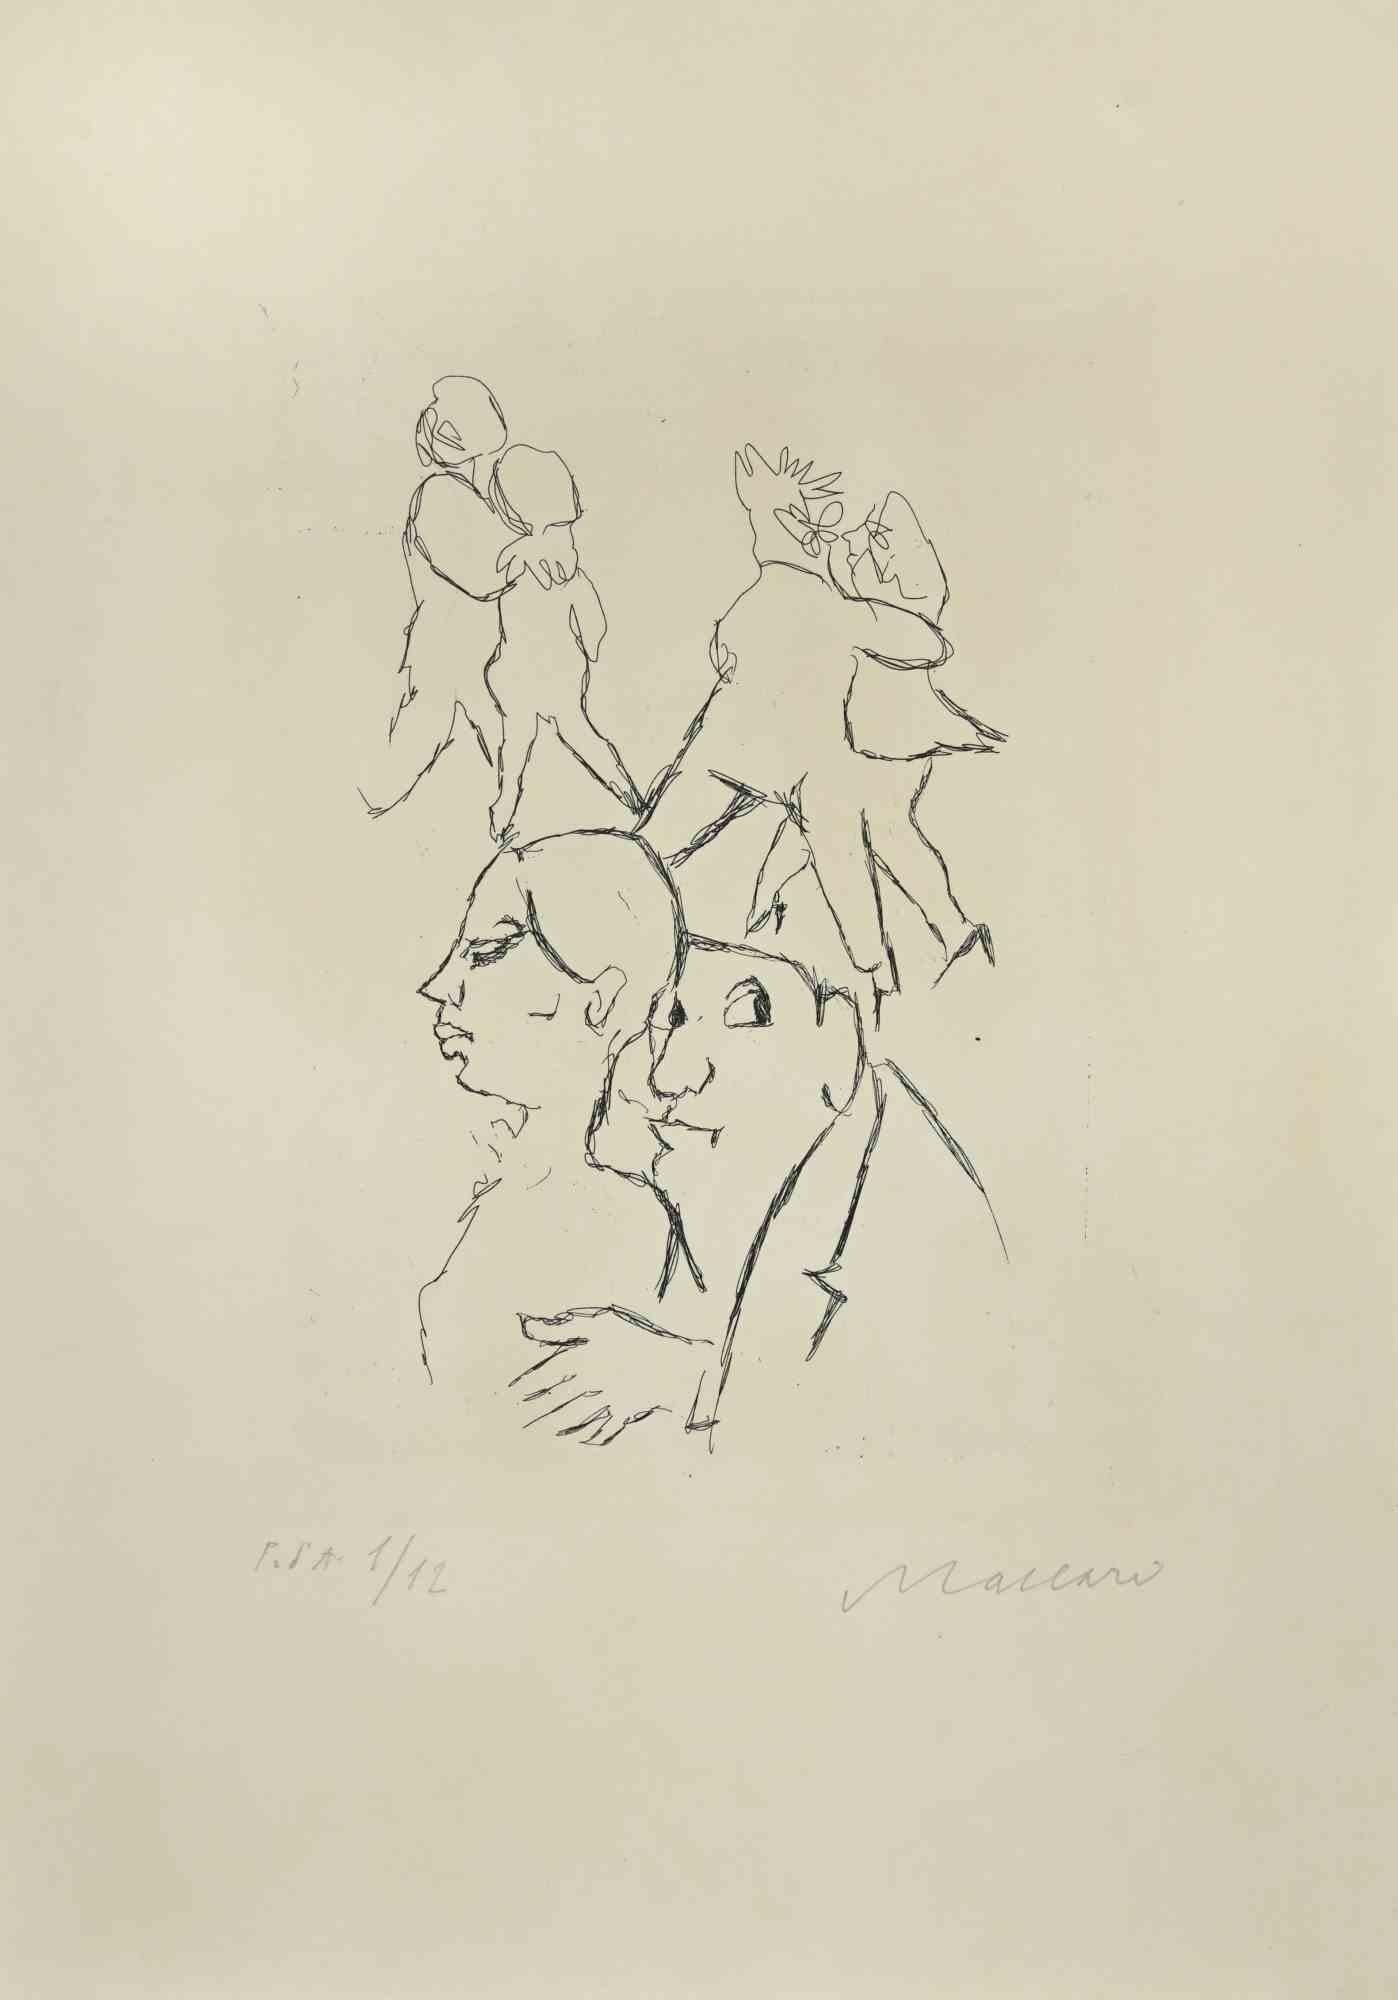 The Dance is an Etching and Drypoint realized by Mino Maccari in the Mid-20th Century.

Hand-signed in the lower right part.

Artist's proof. Edition,1/12.

Good conditions.

Mino Maccari (Siena, 1924-Rome, June 16, 1989) was an Italian writer,